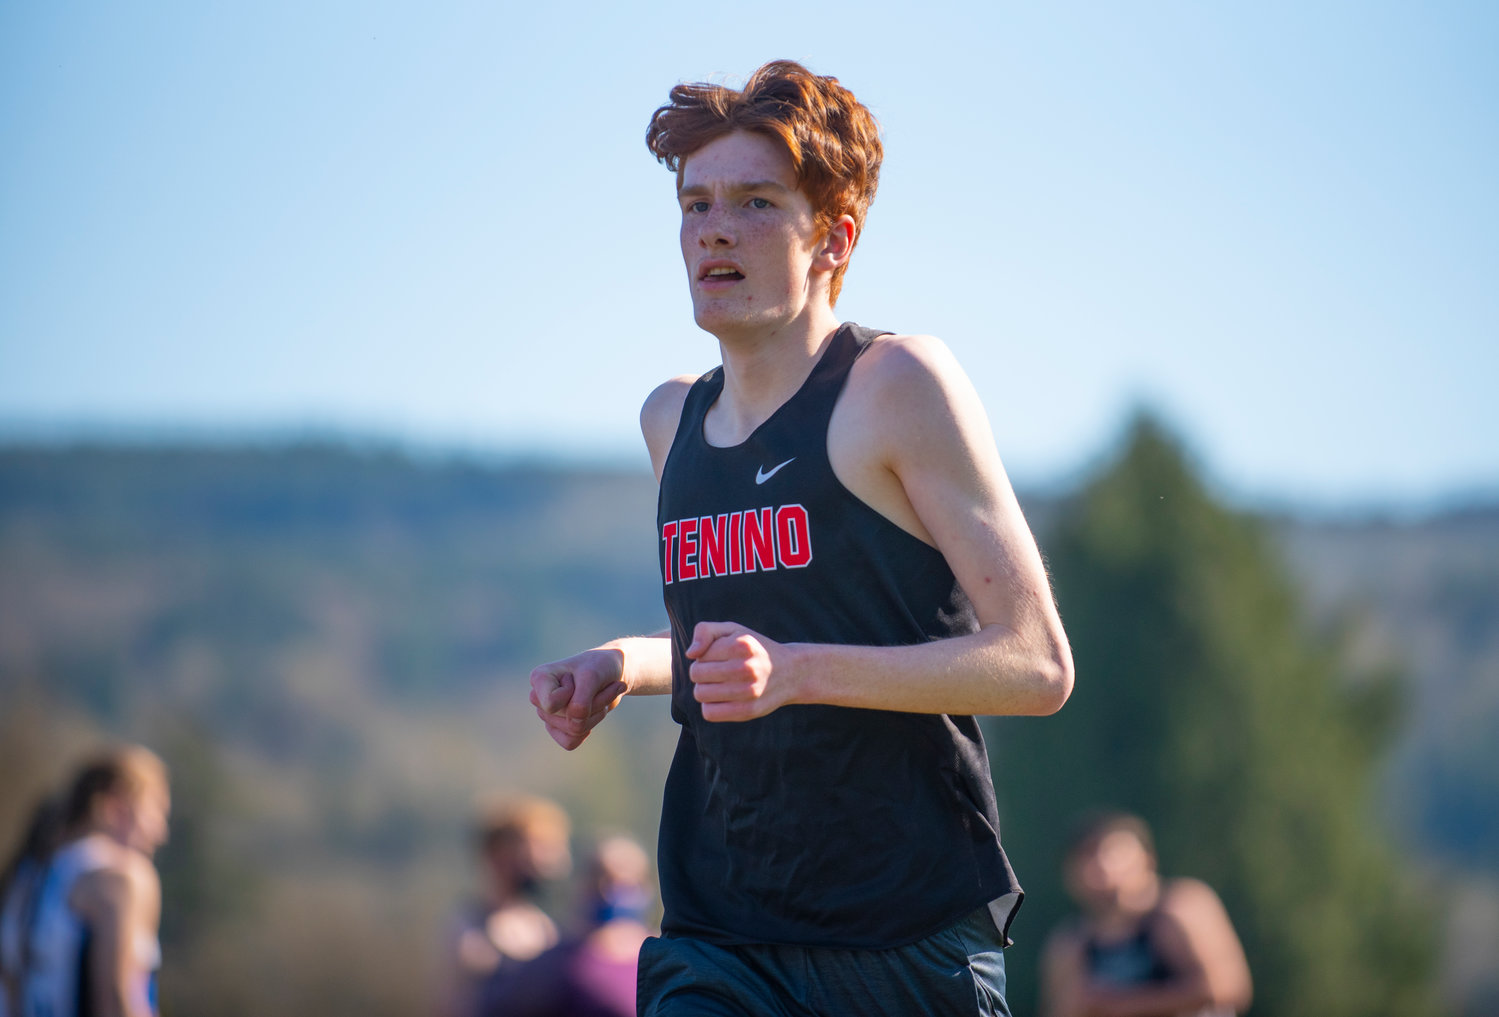 Tenino's Braxton Williams placed third in the boys 1600-meter run on Thursday in Mossyrock.